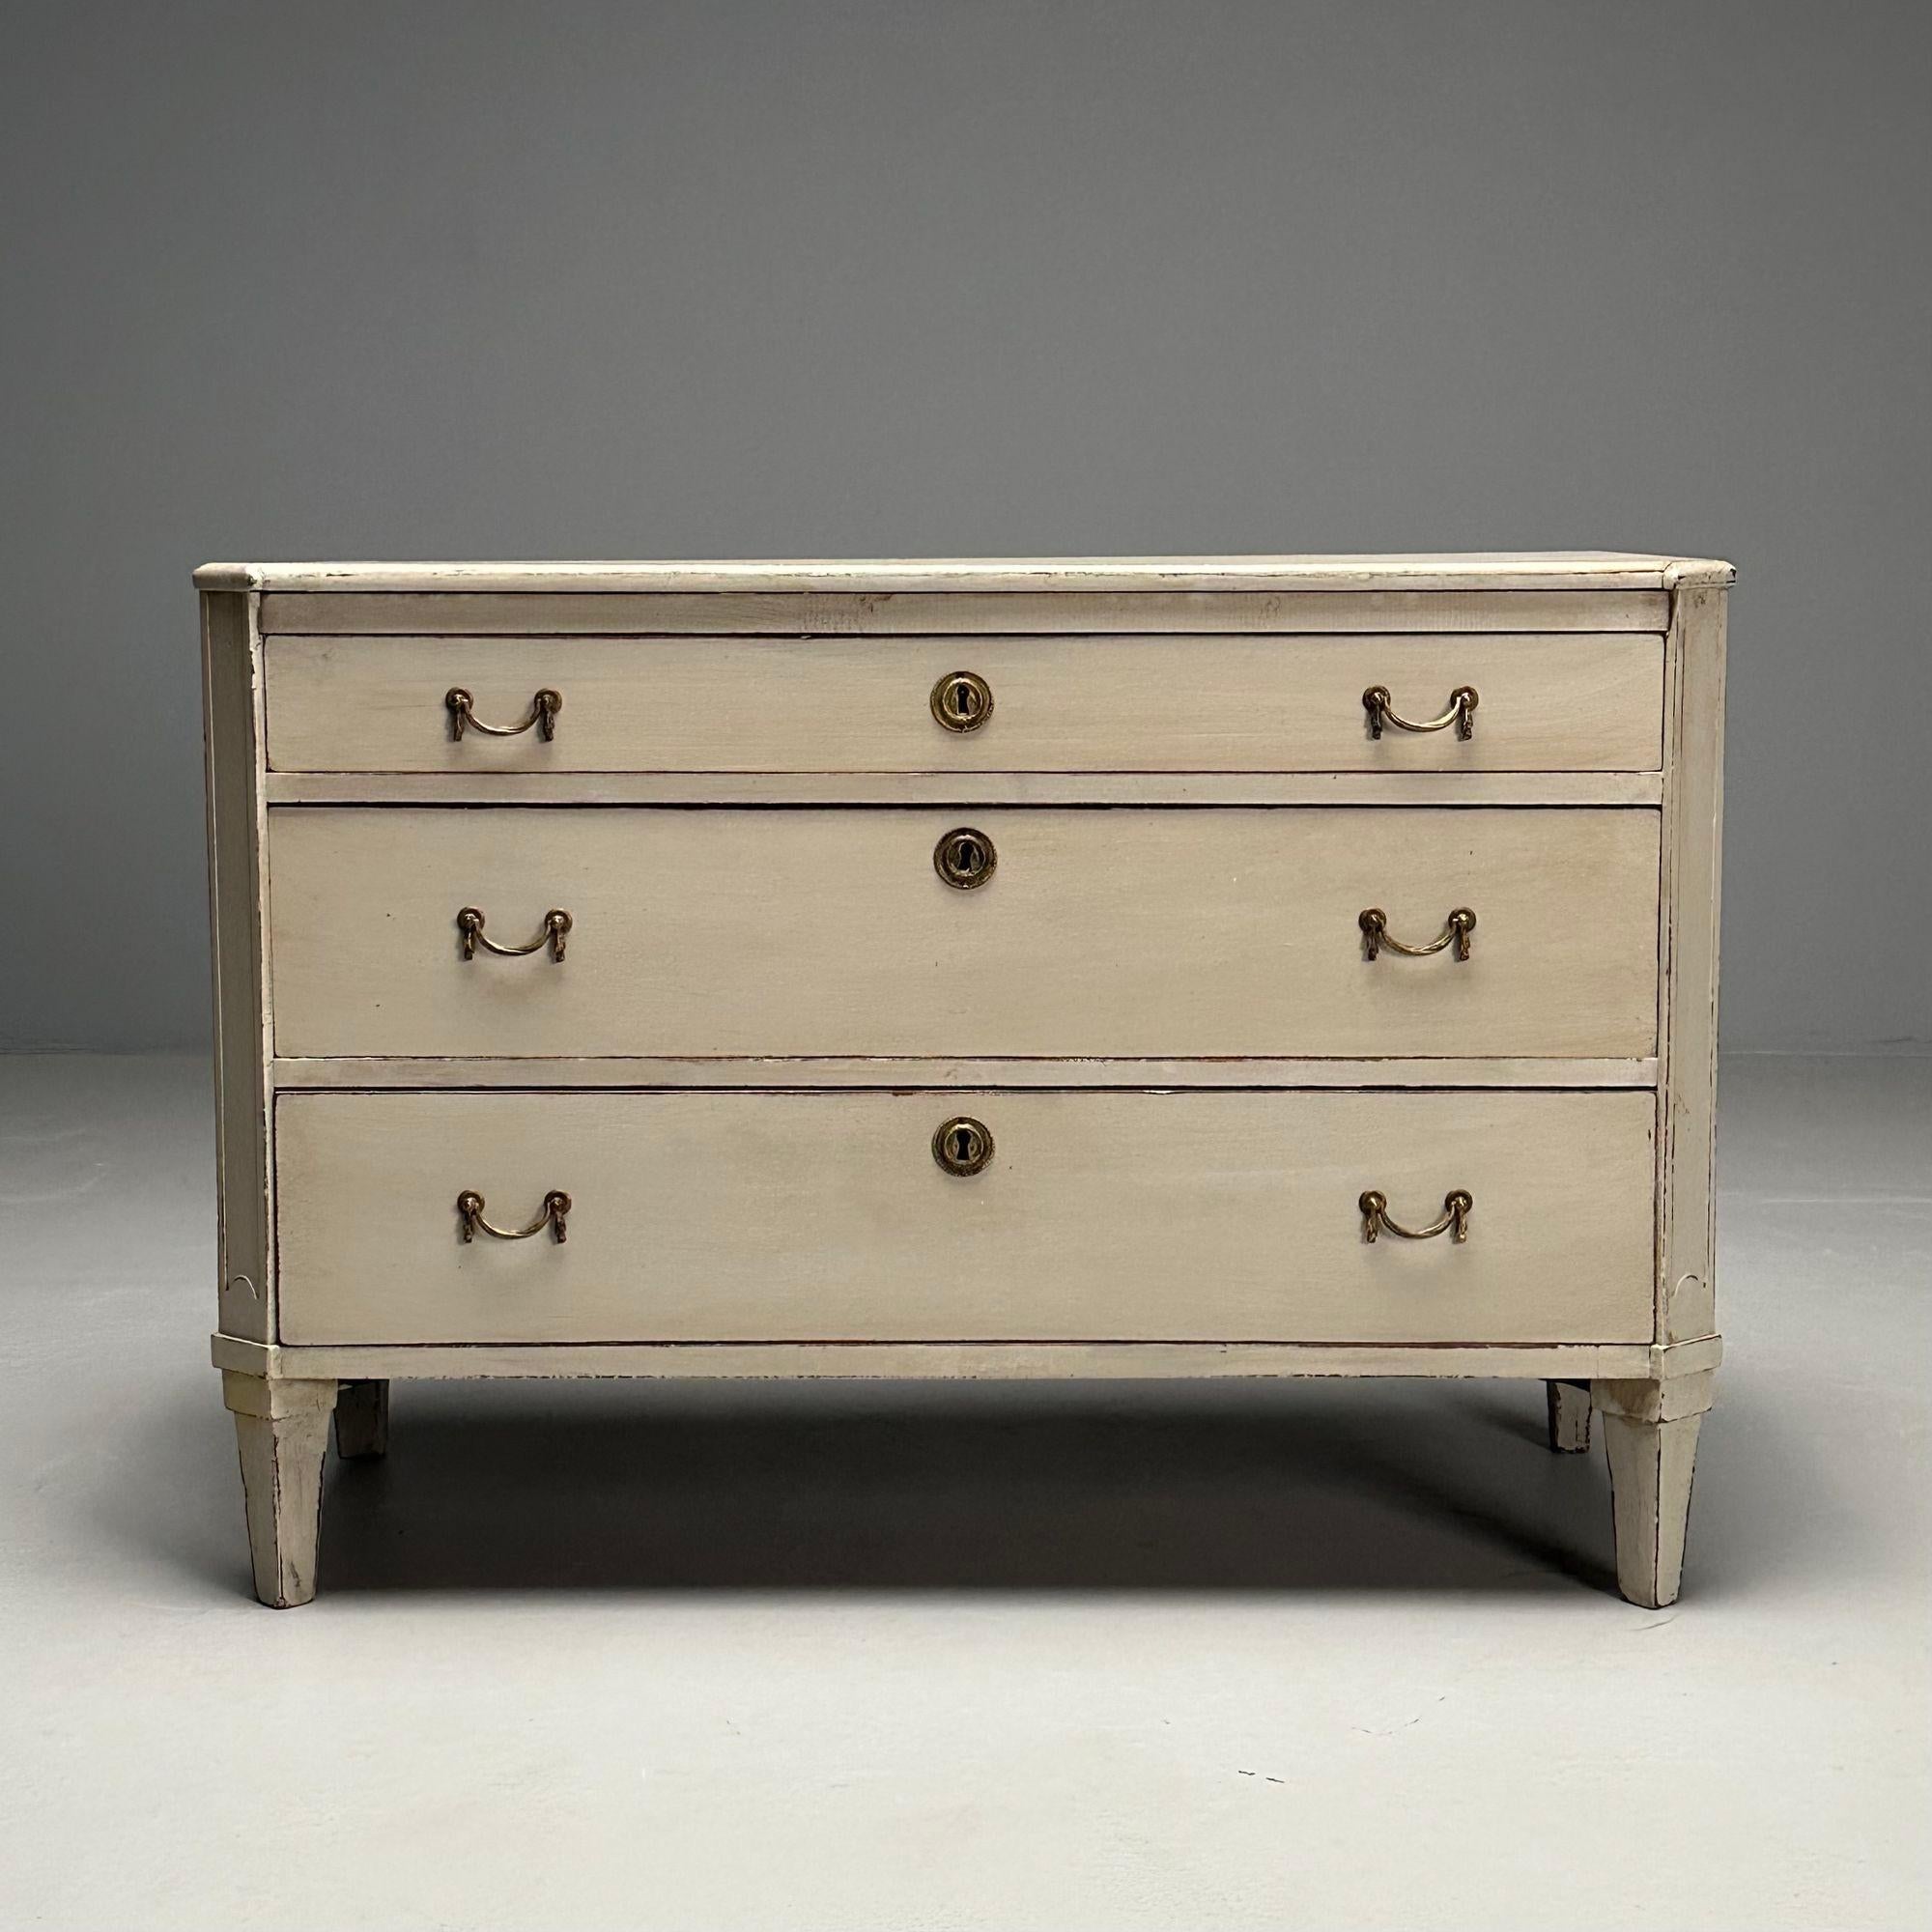 Gustavian, Swedish Commode or Dresser, Grey Paint Distressed, Brass, Sweden, 1900s

Gustavian dresser or chest of drawers designed and produced in Sweden in the early 20th century. This example features a distressed light gray paint decorated